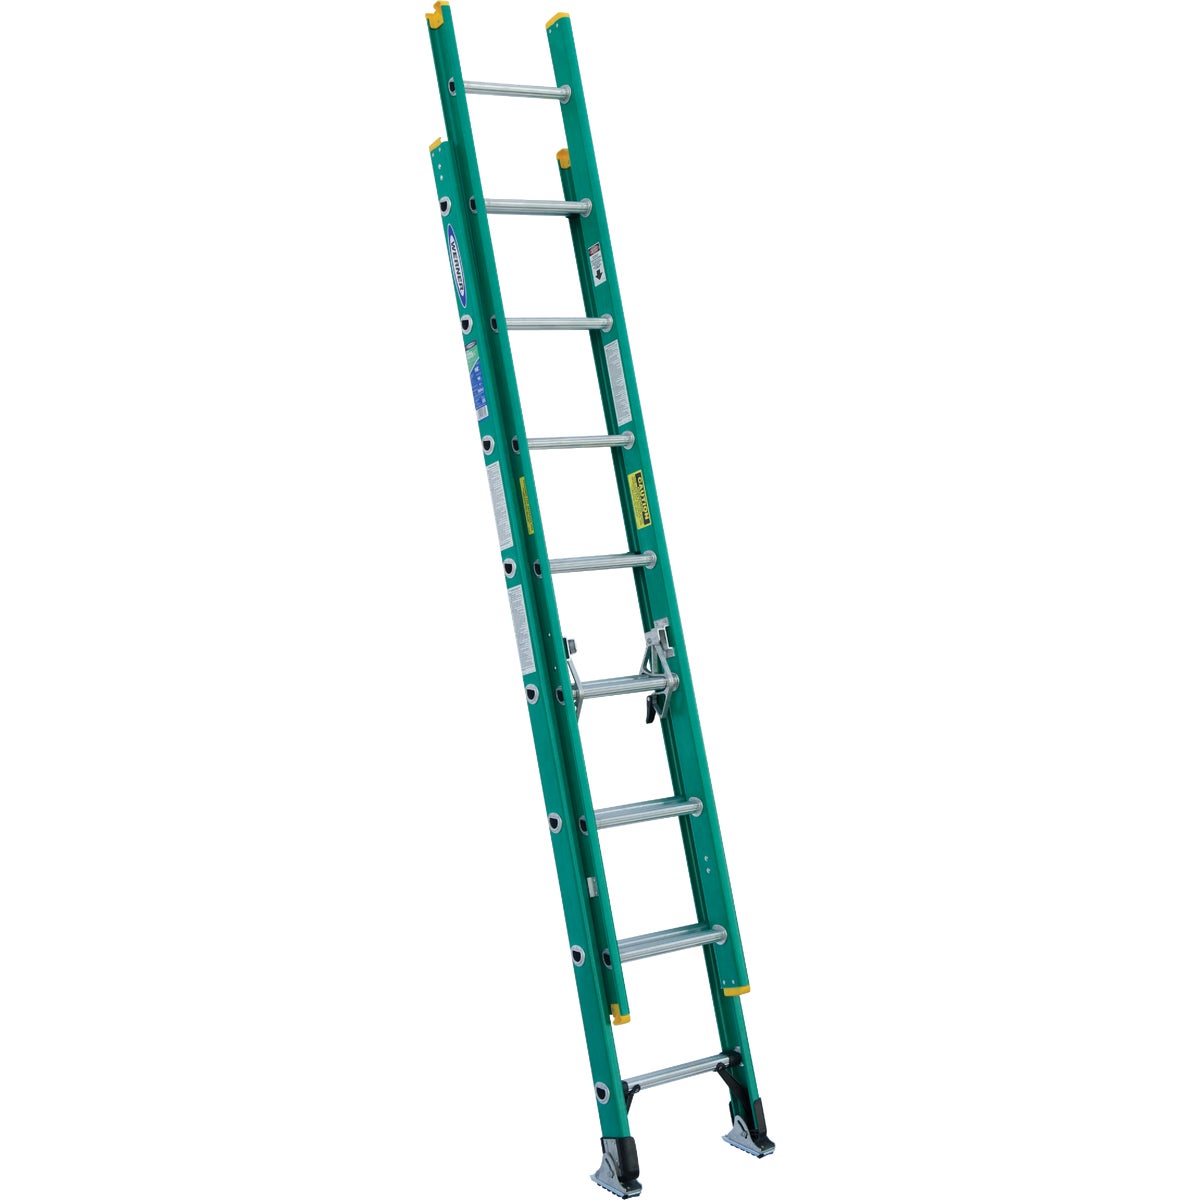 Werner 16 Ft. Fiberglass Extension Ladder with 225 Lb. Load Capacity Type II Duty Rating